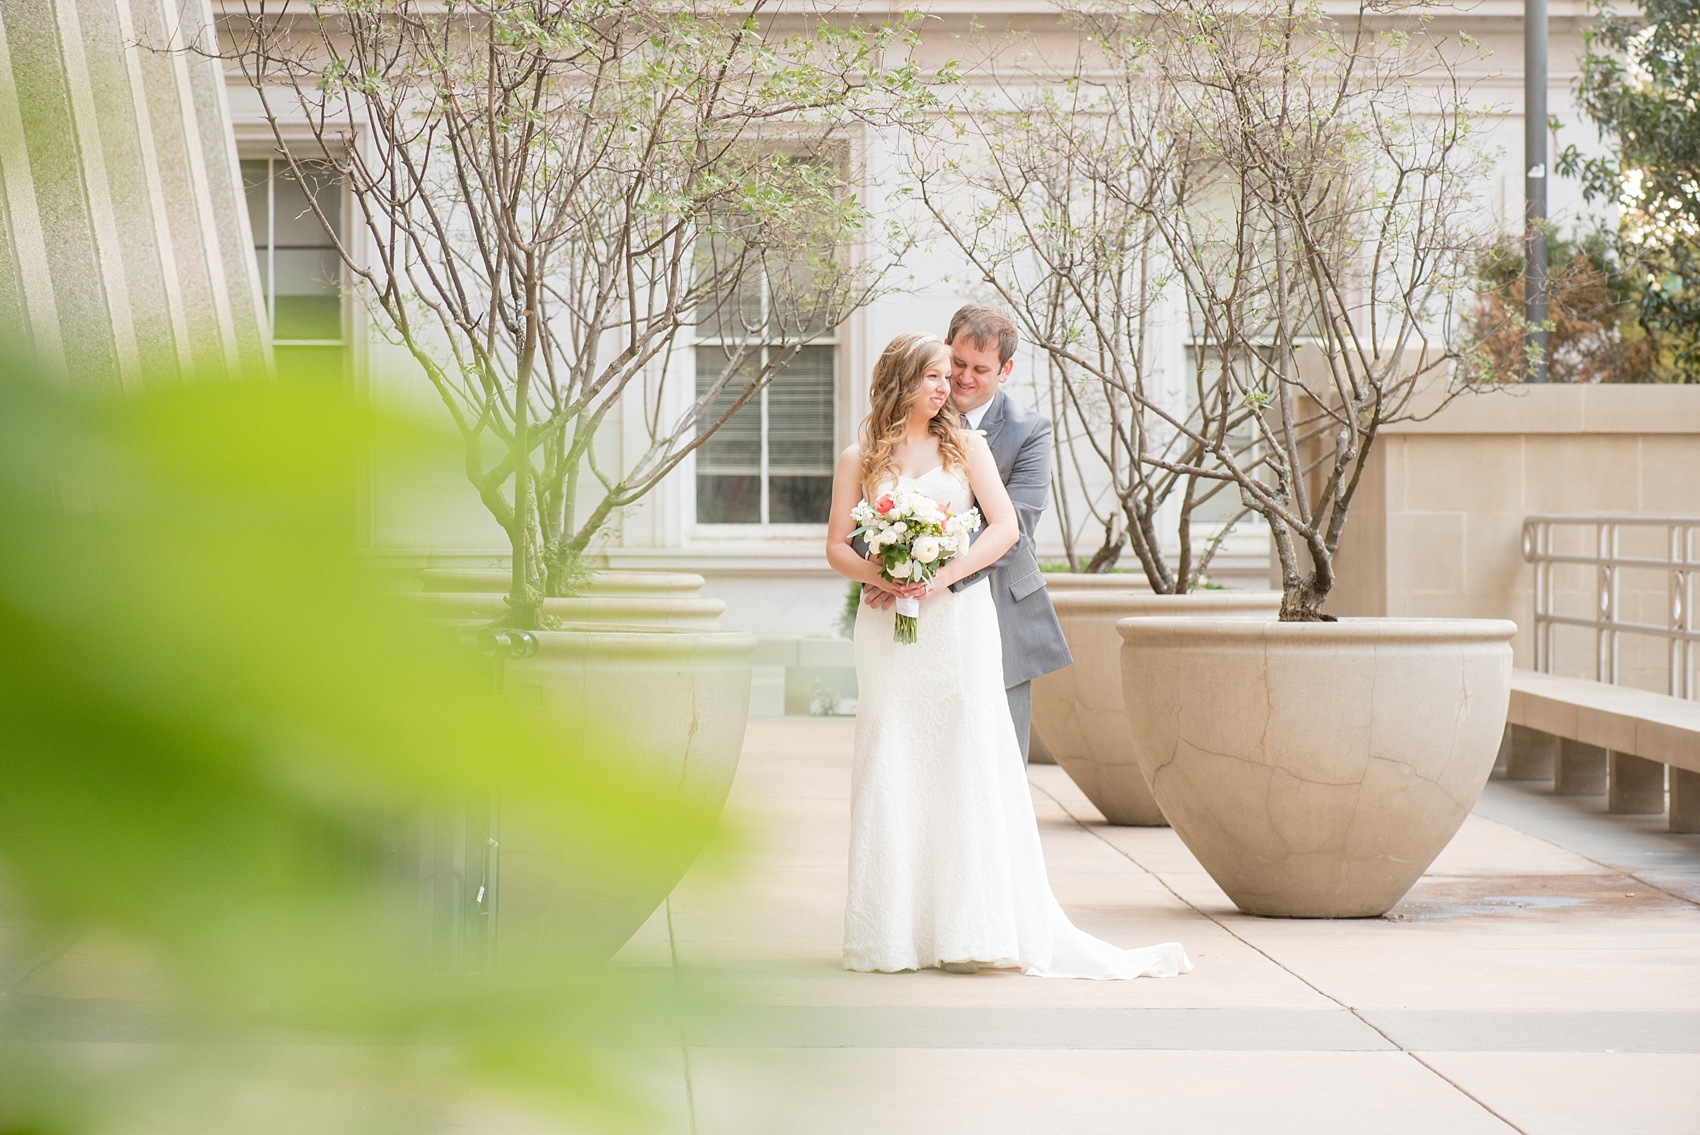 Mikkel Paige Photography photos from a fall wedding at The Stockroom at 230. A picture of the bride and groom in downtown Raleigh with columns and iconic architecture.